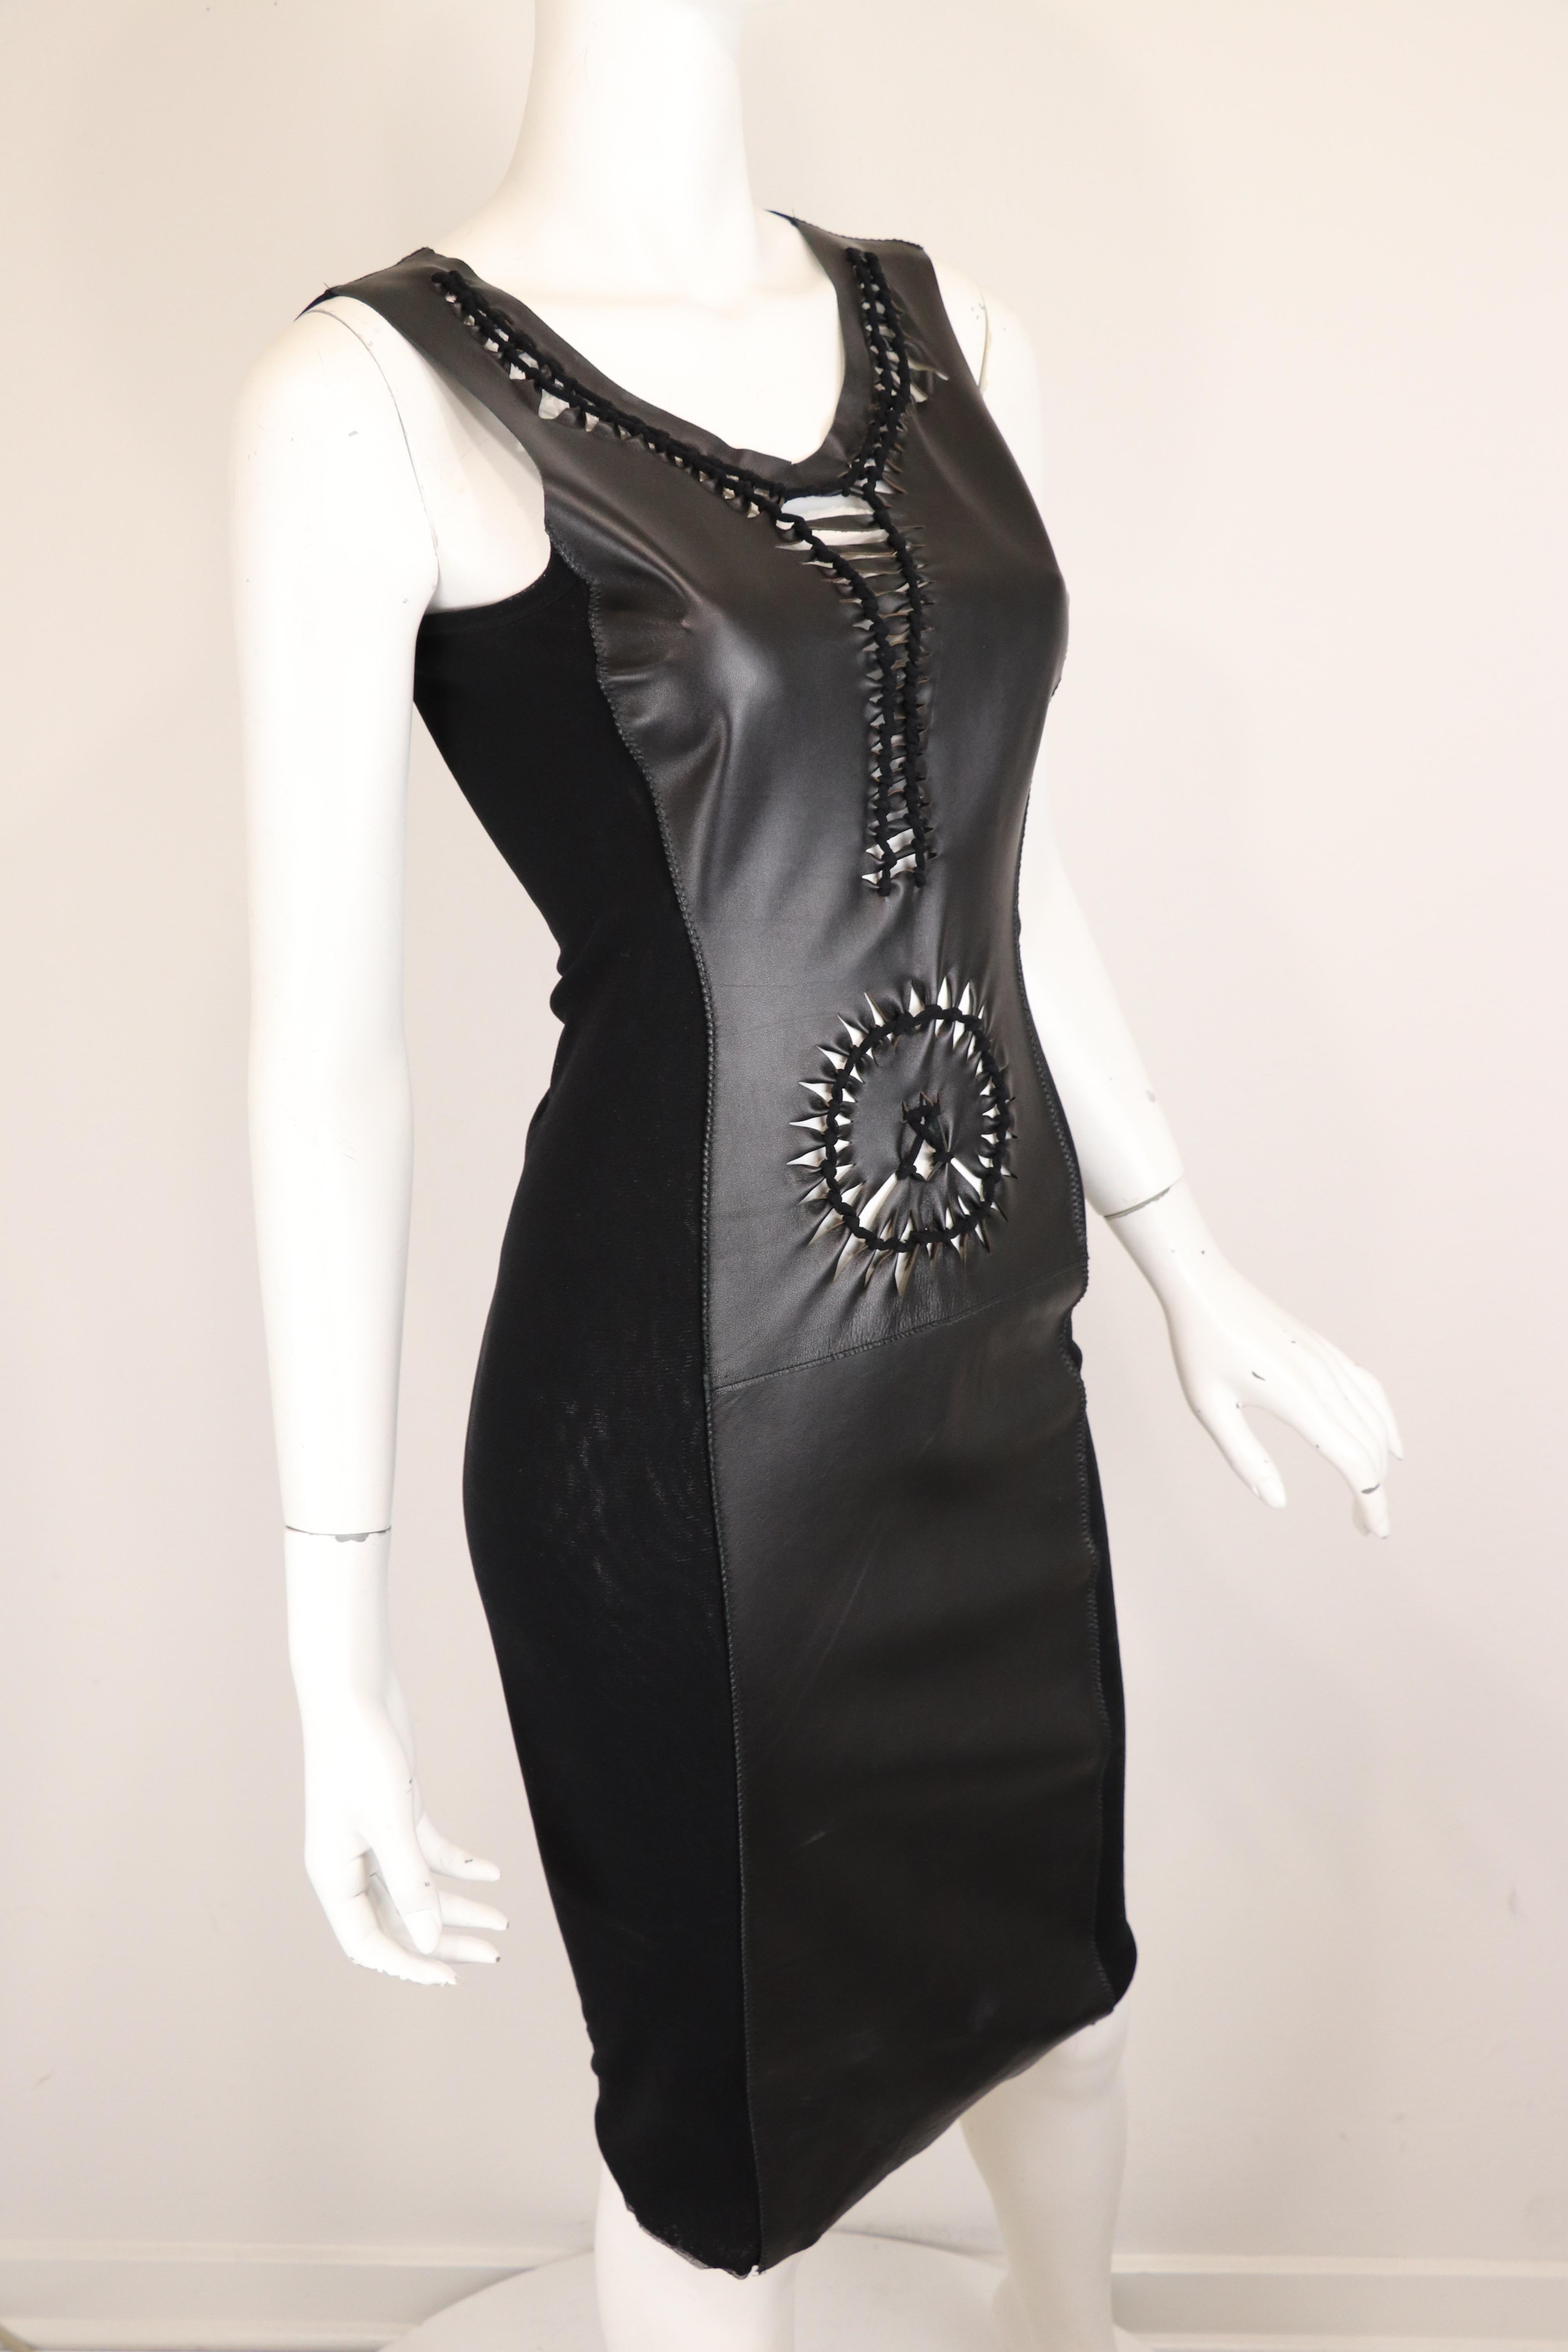 Jean Paul Gaultier Soleil Leather & Mesh Dress  In Excellent Condition For Sale In Carmel, CA